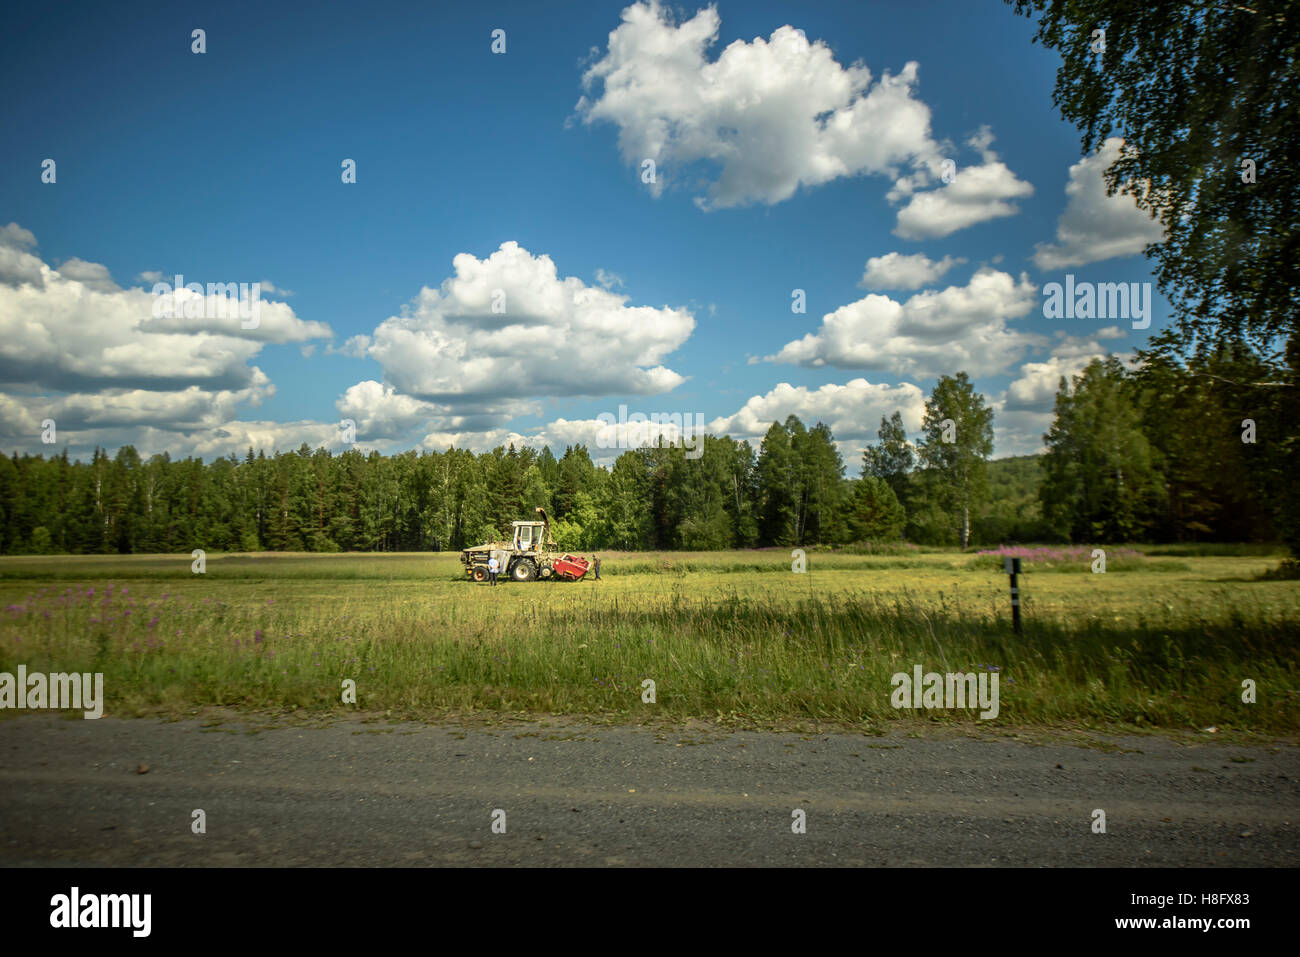 Tractor in a field Stock Photo